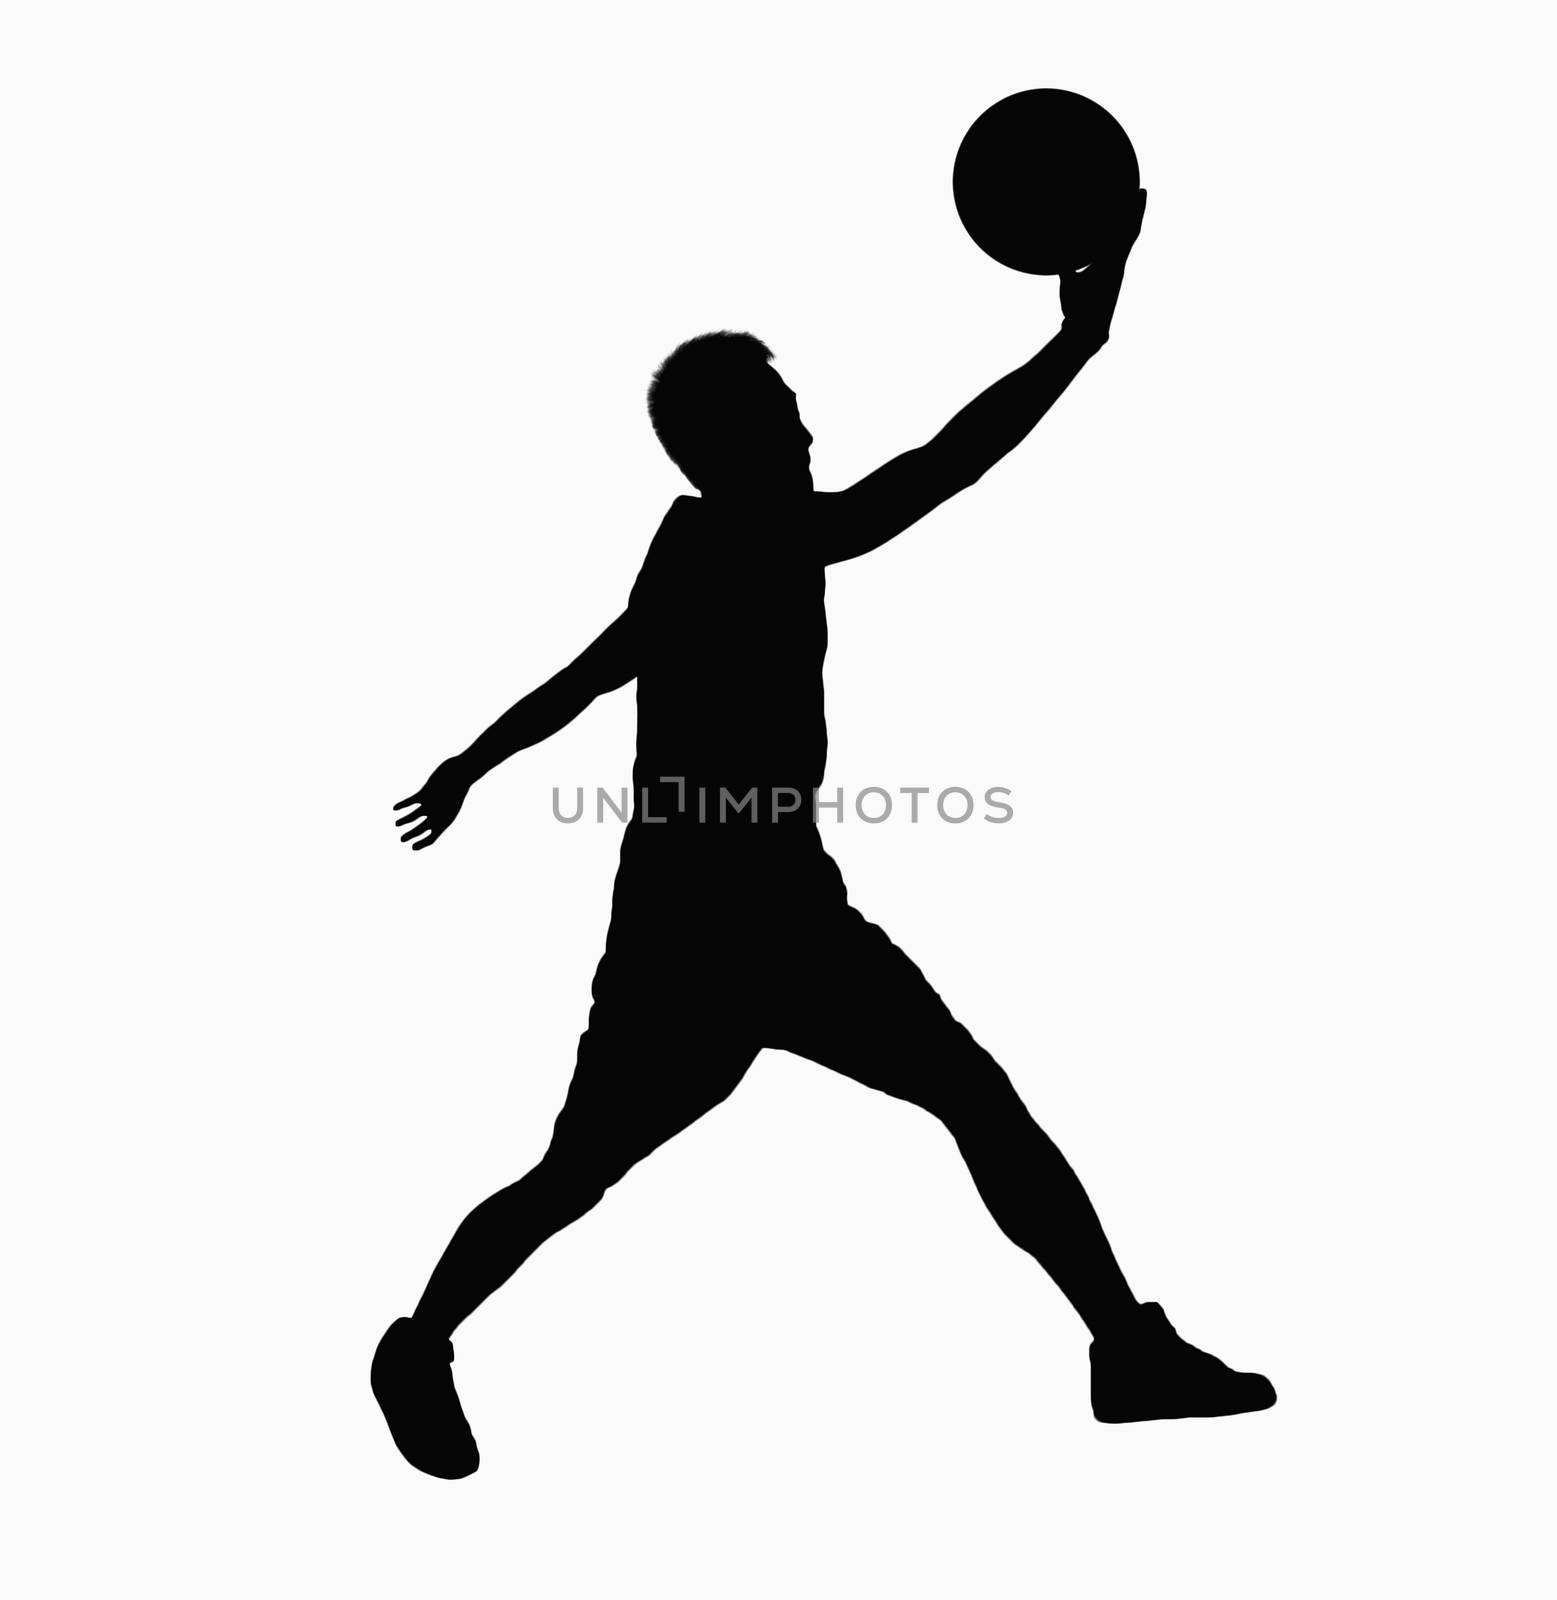 Silhouette of basketball player jumping with ball.